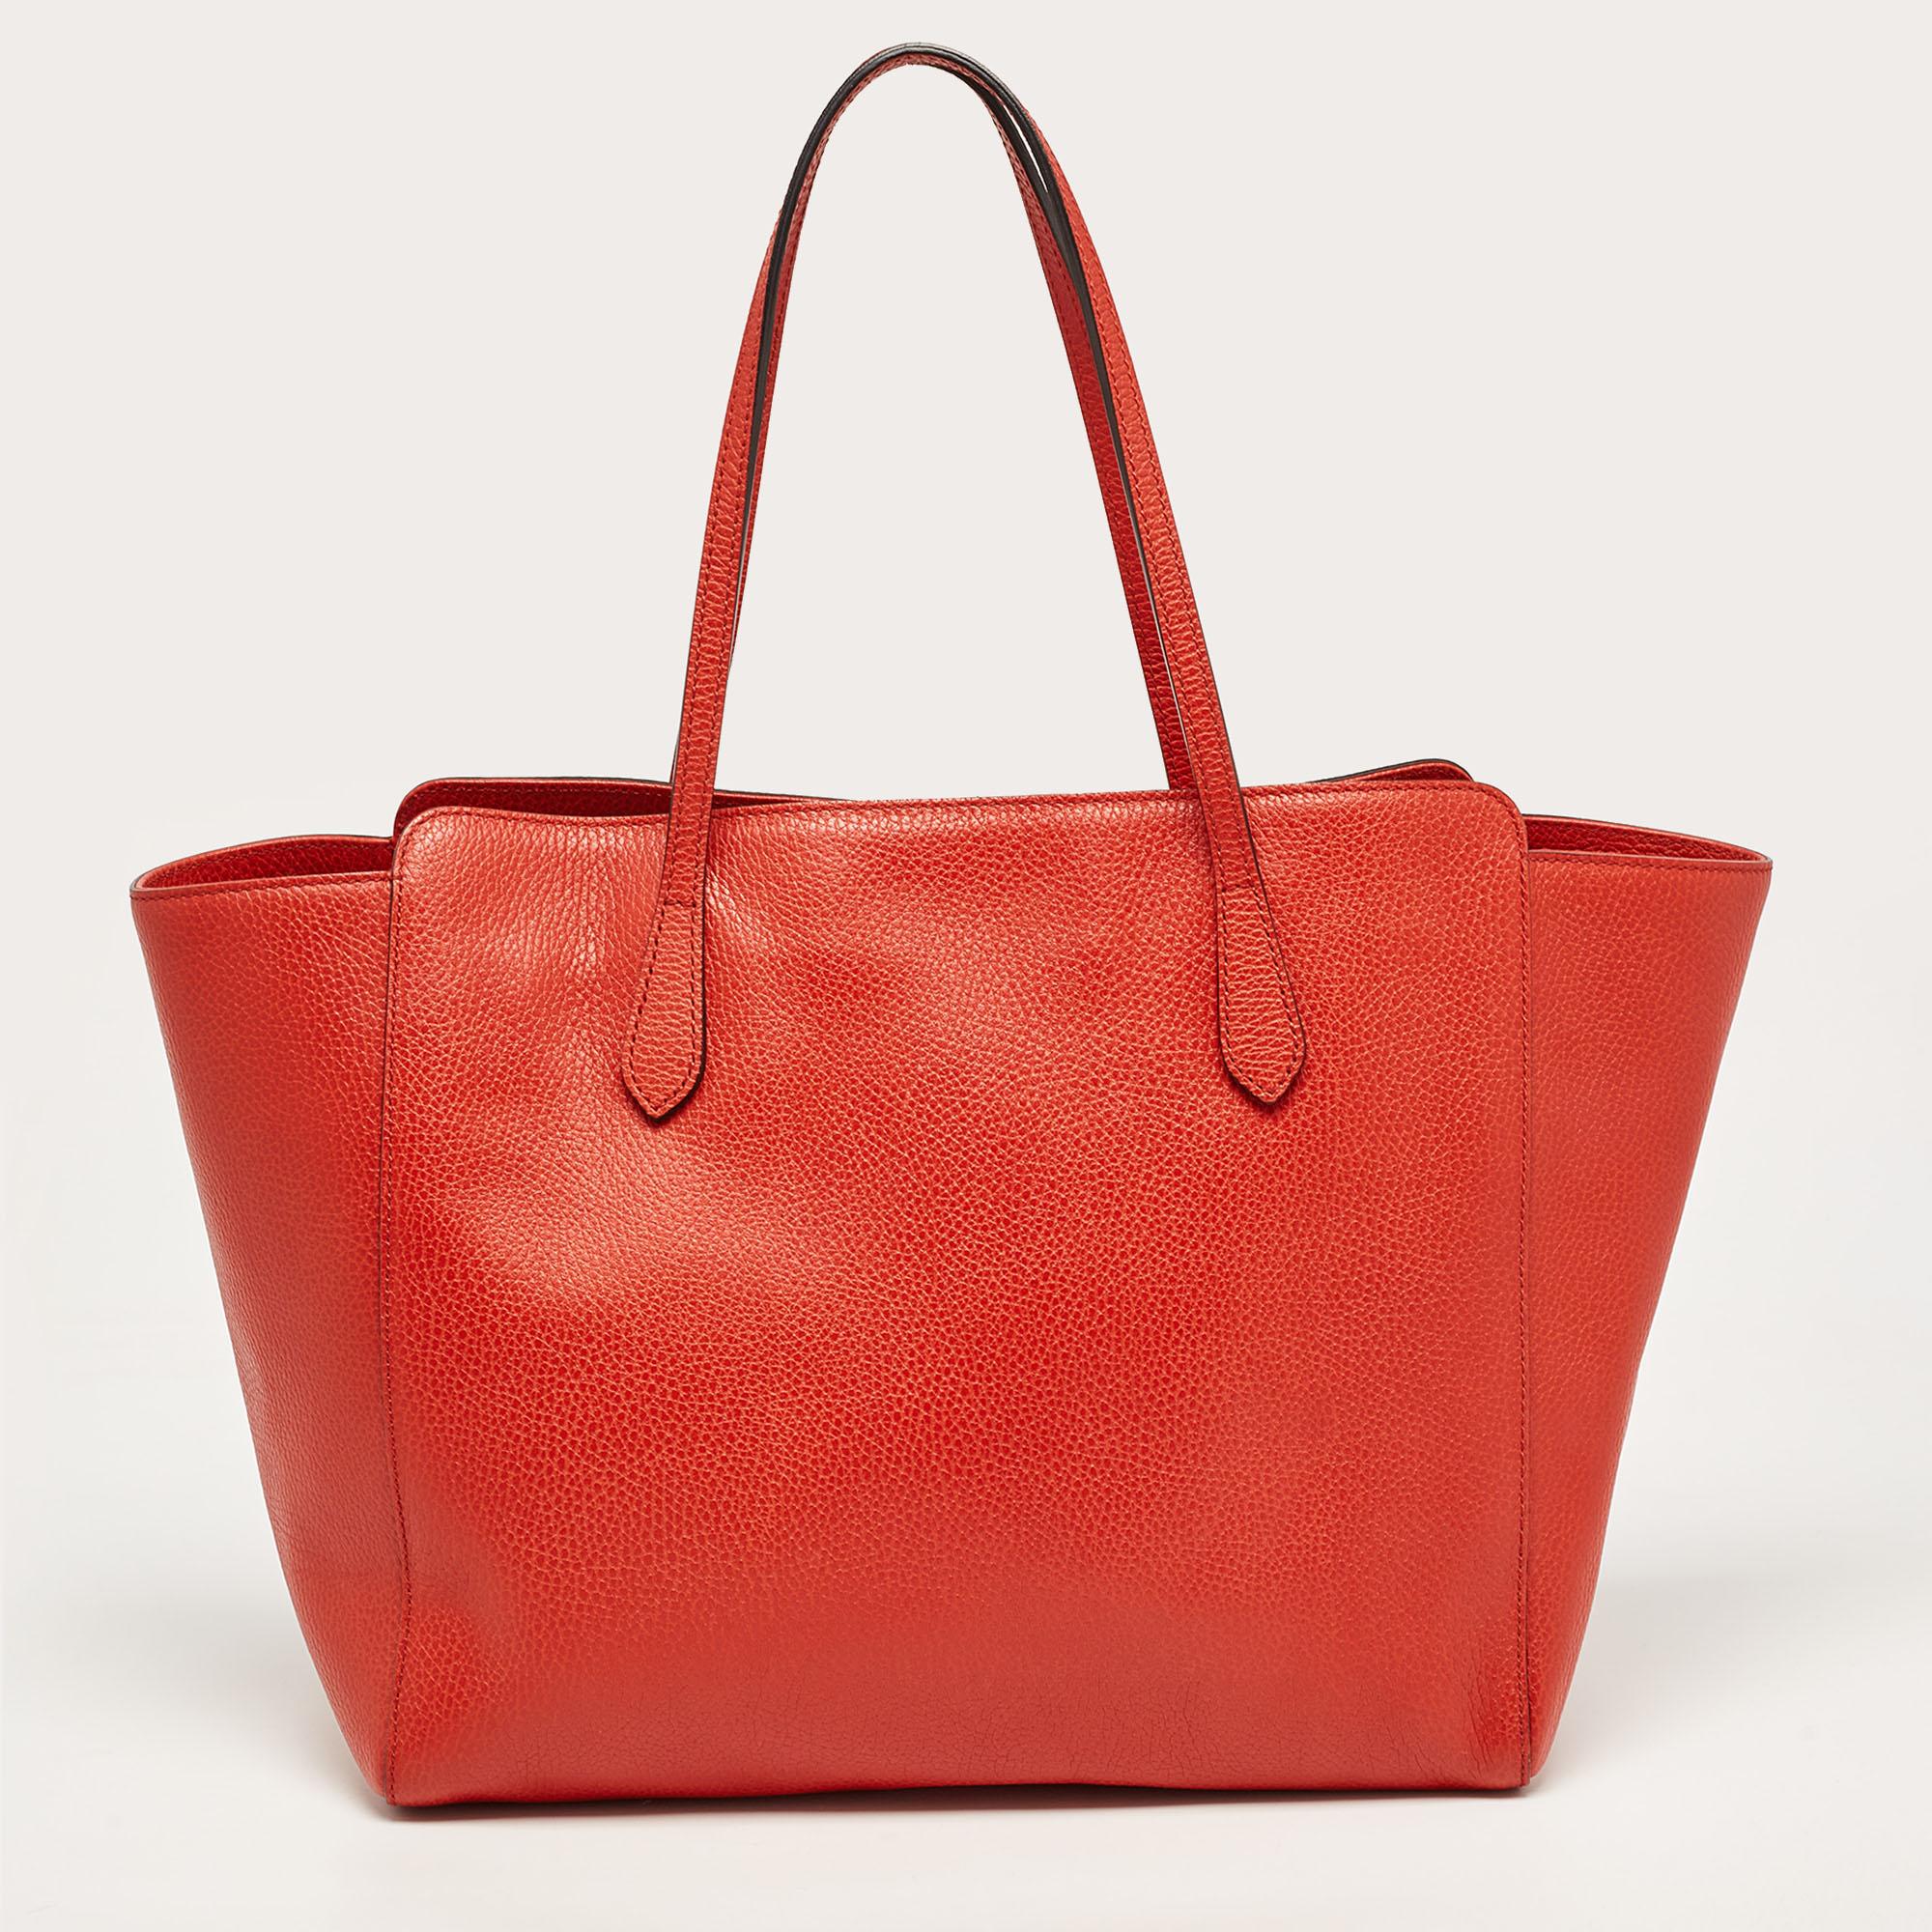 Created from high-quality materials, this Gucci tote is enriched with functional and classic elements. It can be carried around conveniently, and its interior is perfectly sized to keep your belongings with ease.

Includes: Original Dustbag, Info